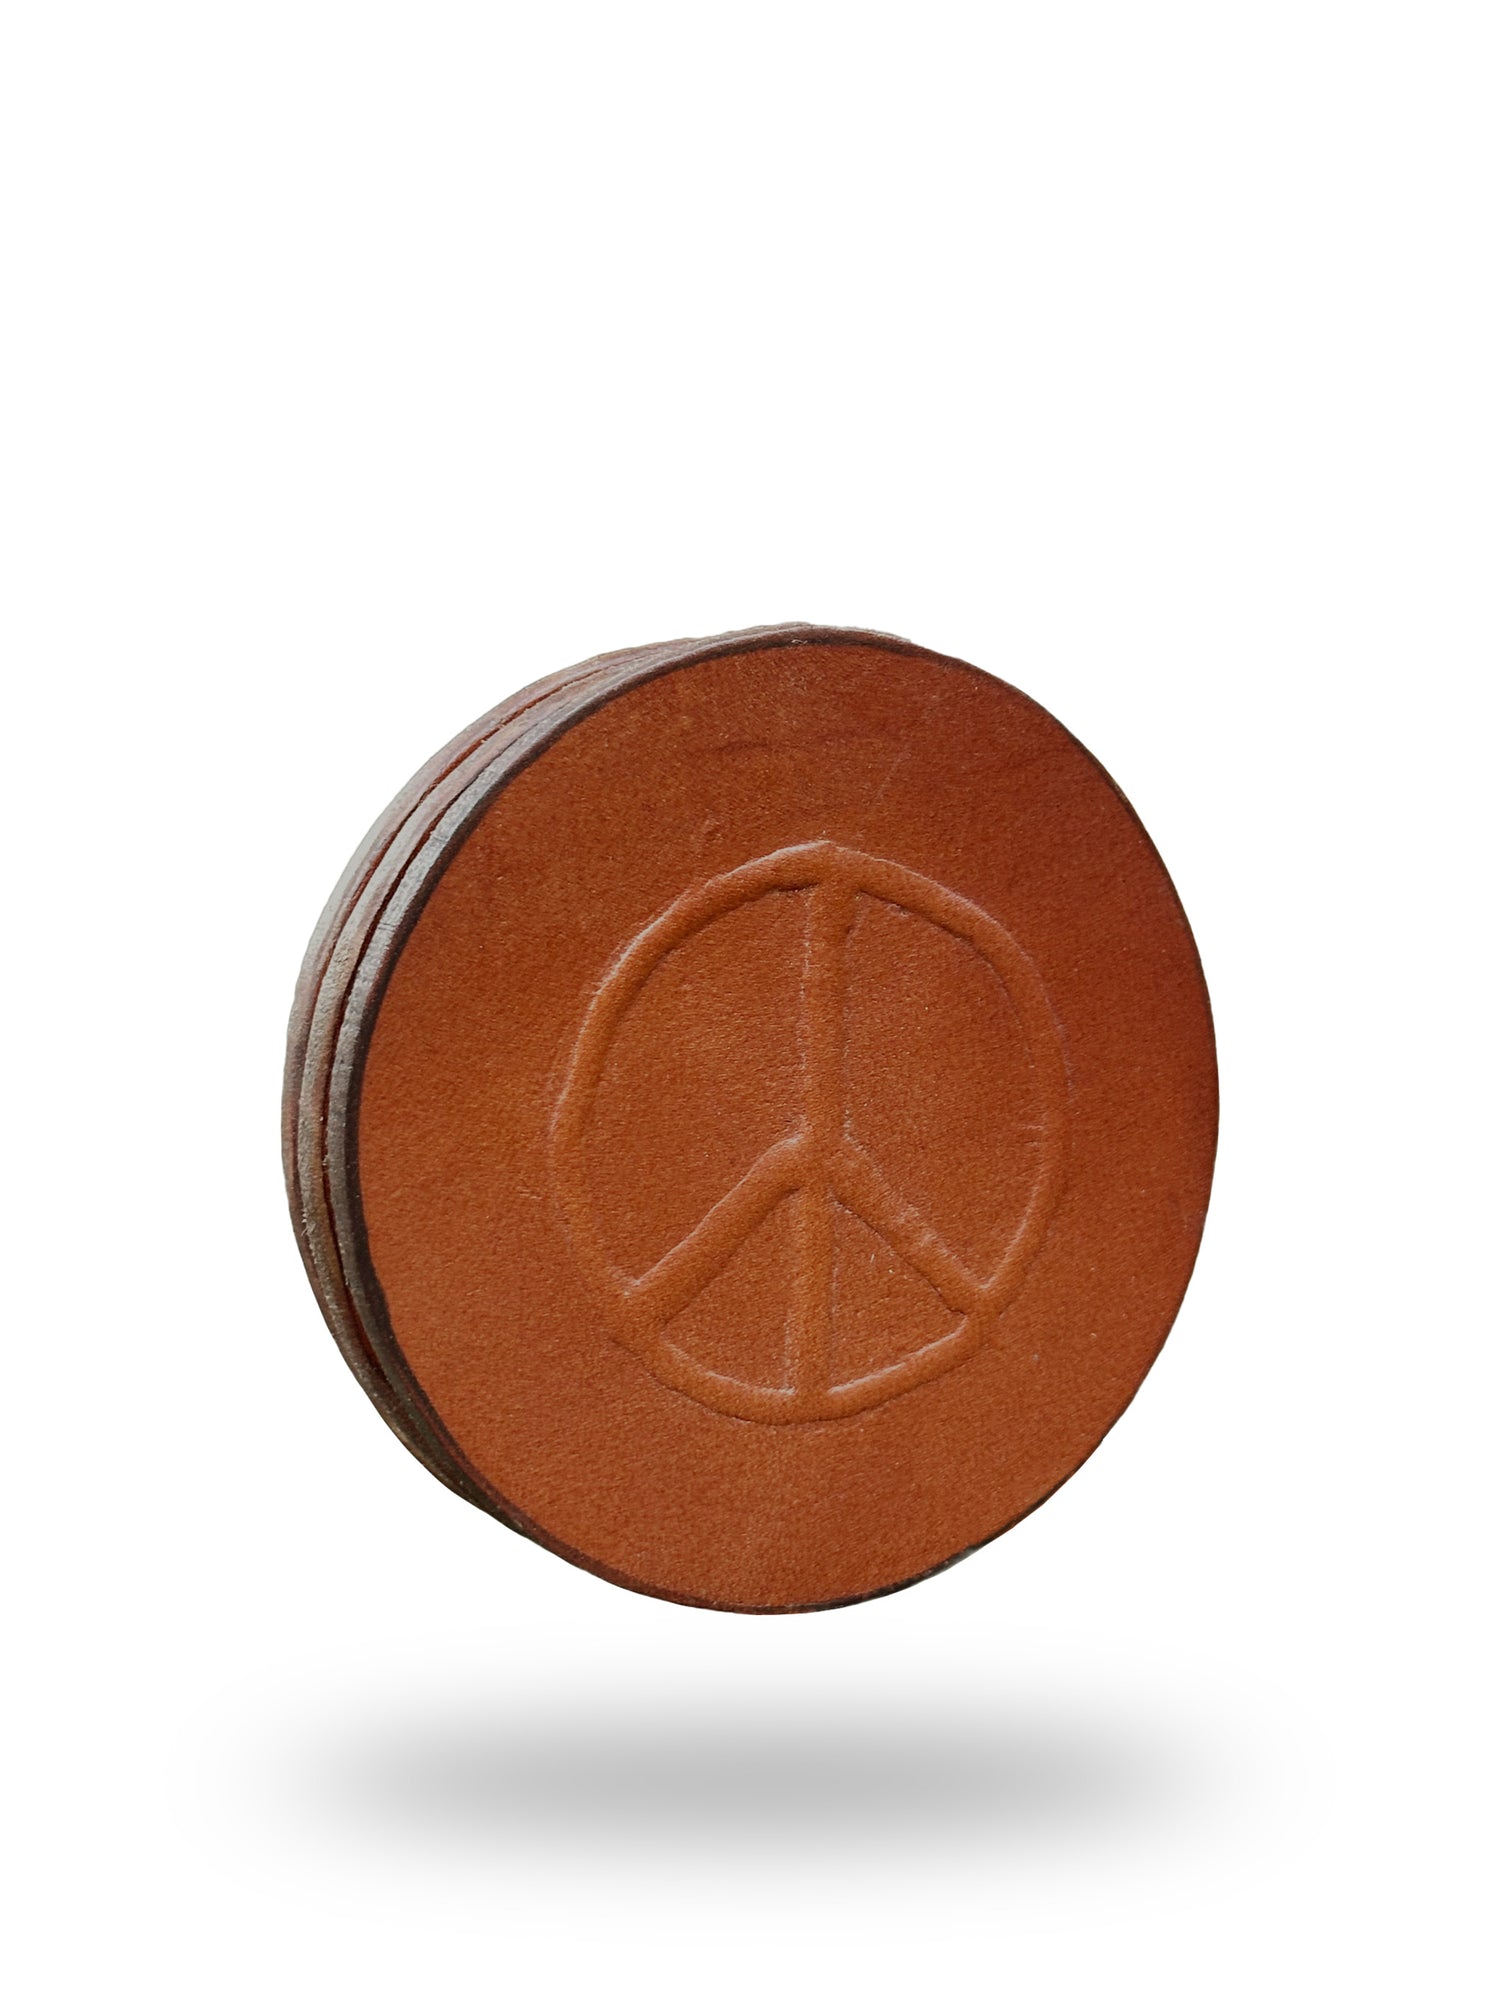 Embossed with Hand Carved Peace Sign, English Bridle Leather Coaster Set of 4